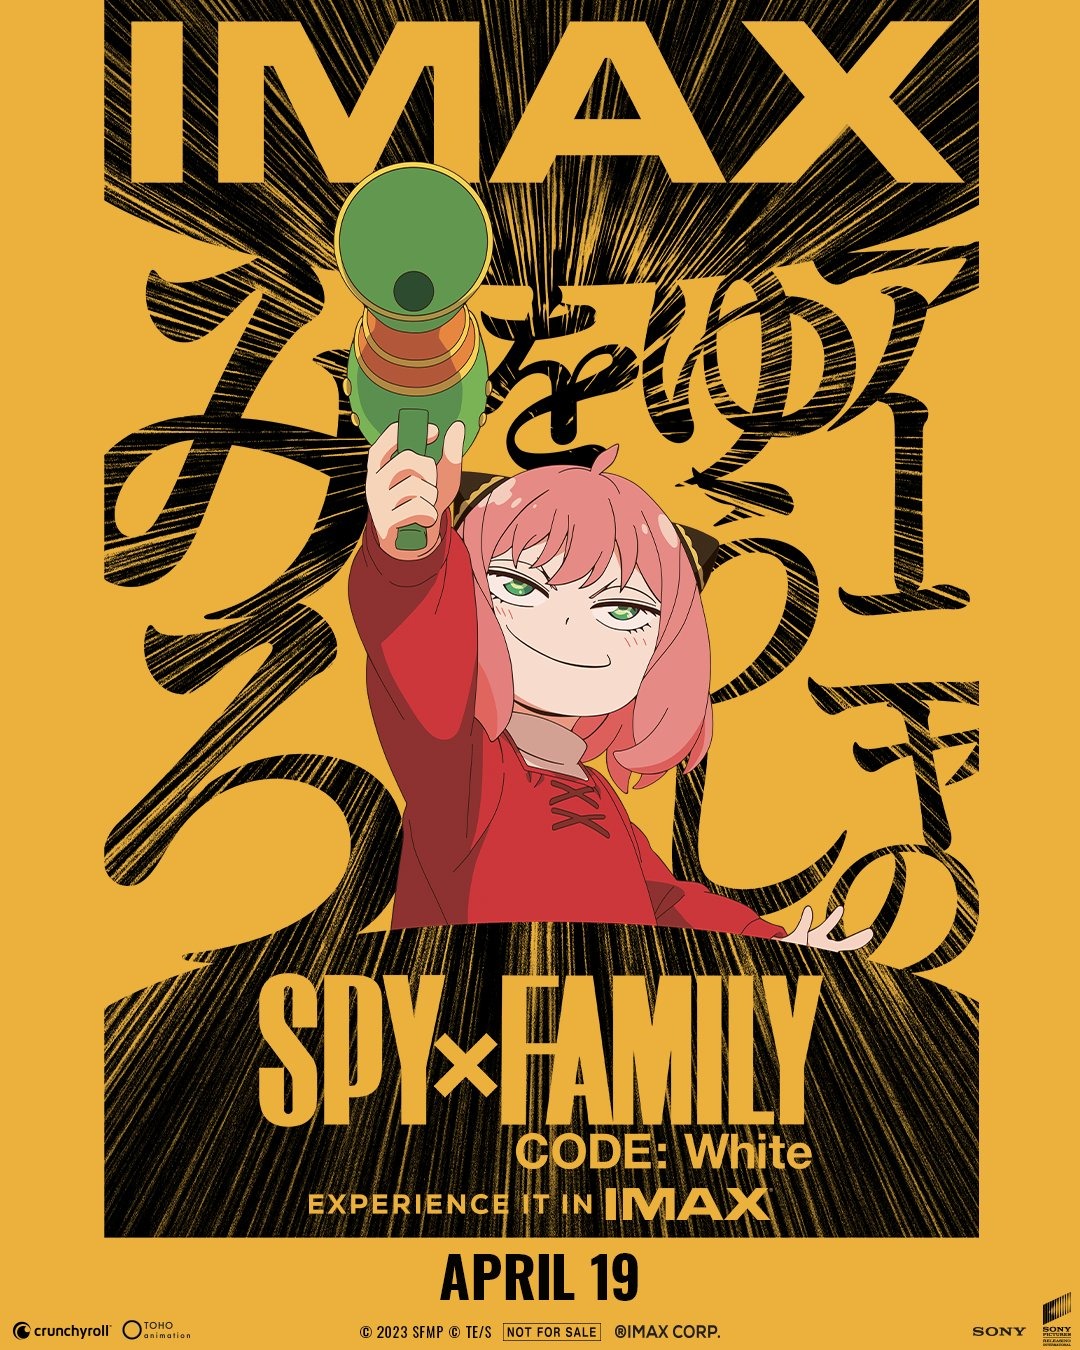 Extra Large Movie Poster Image for Gekijoban Spy x Family Code: White (#2 of 4)